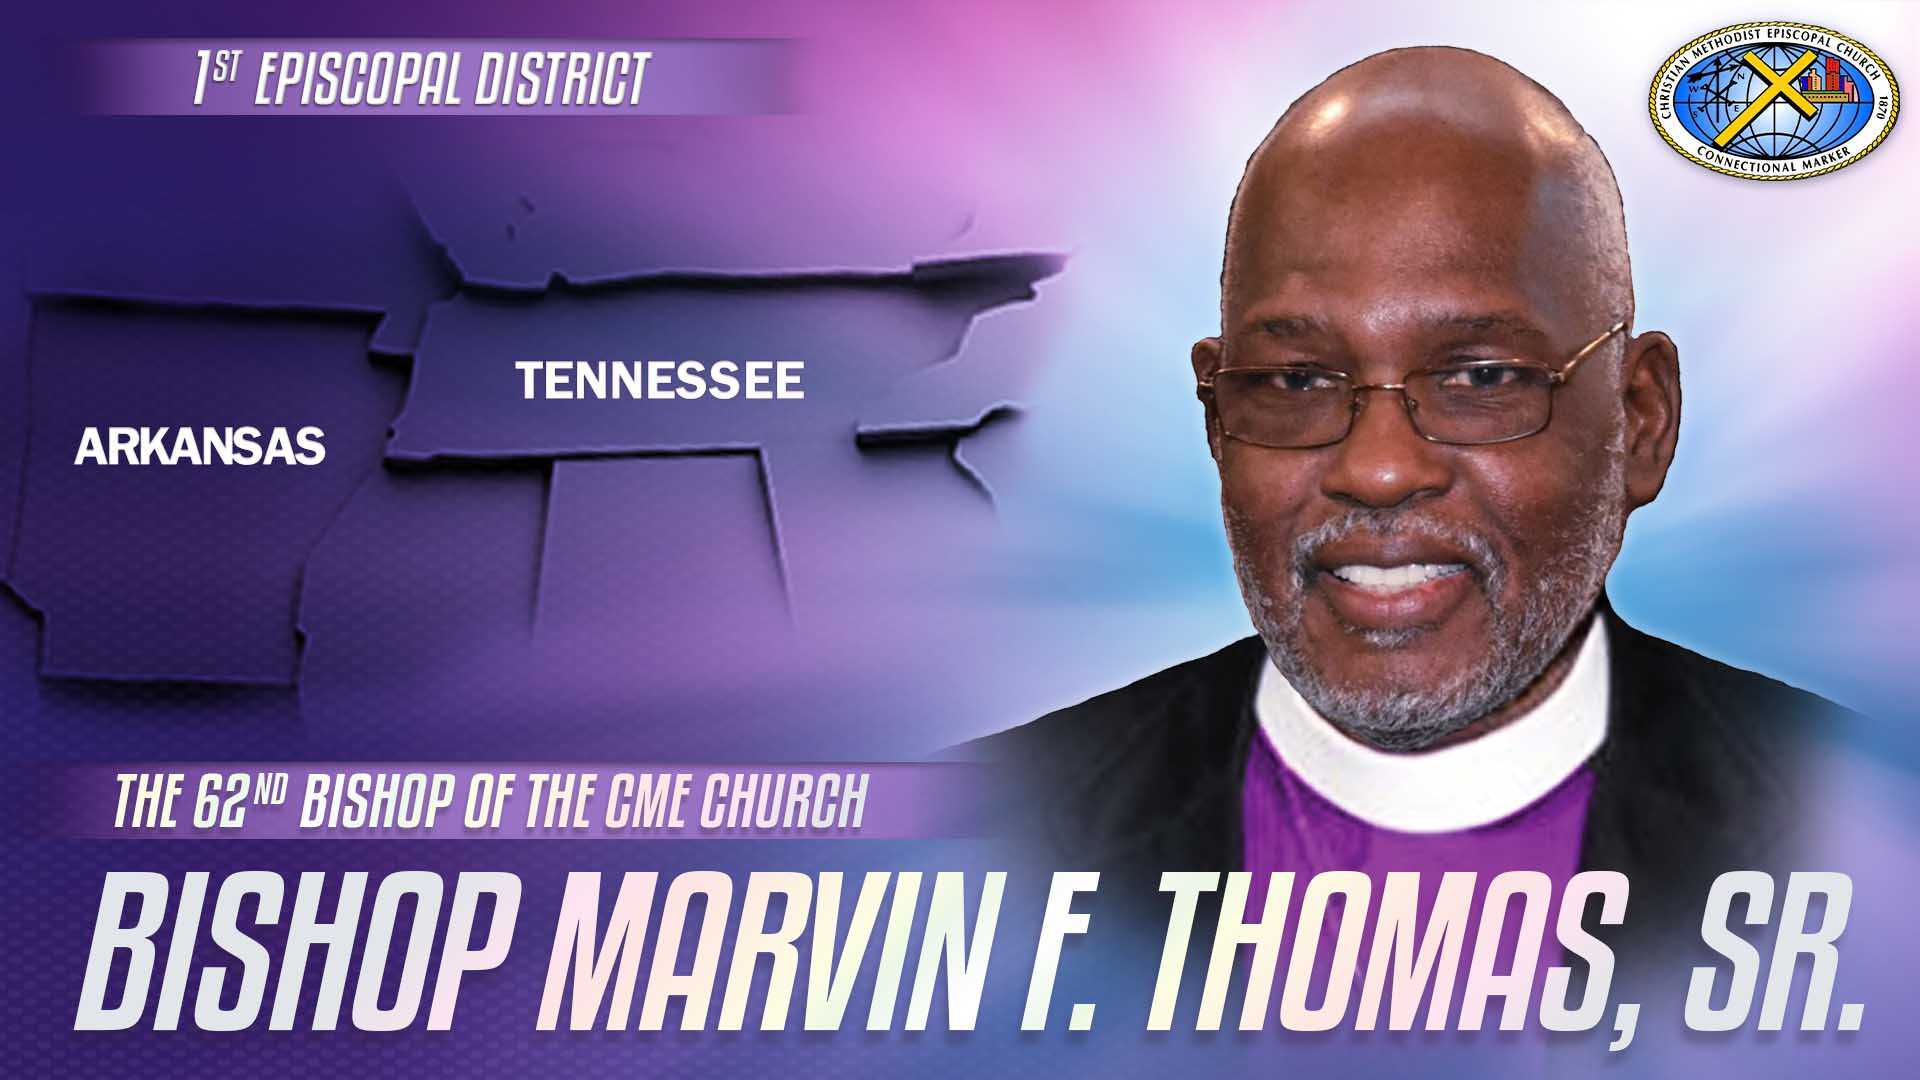 A picture of the rev. Marvin thomas